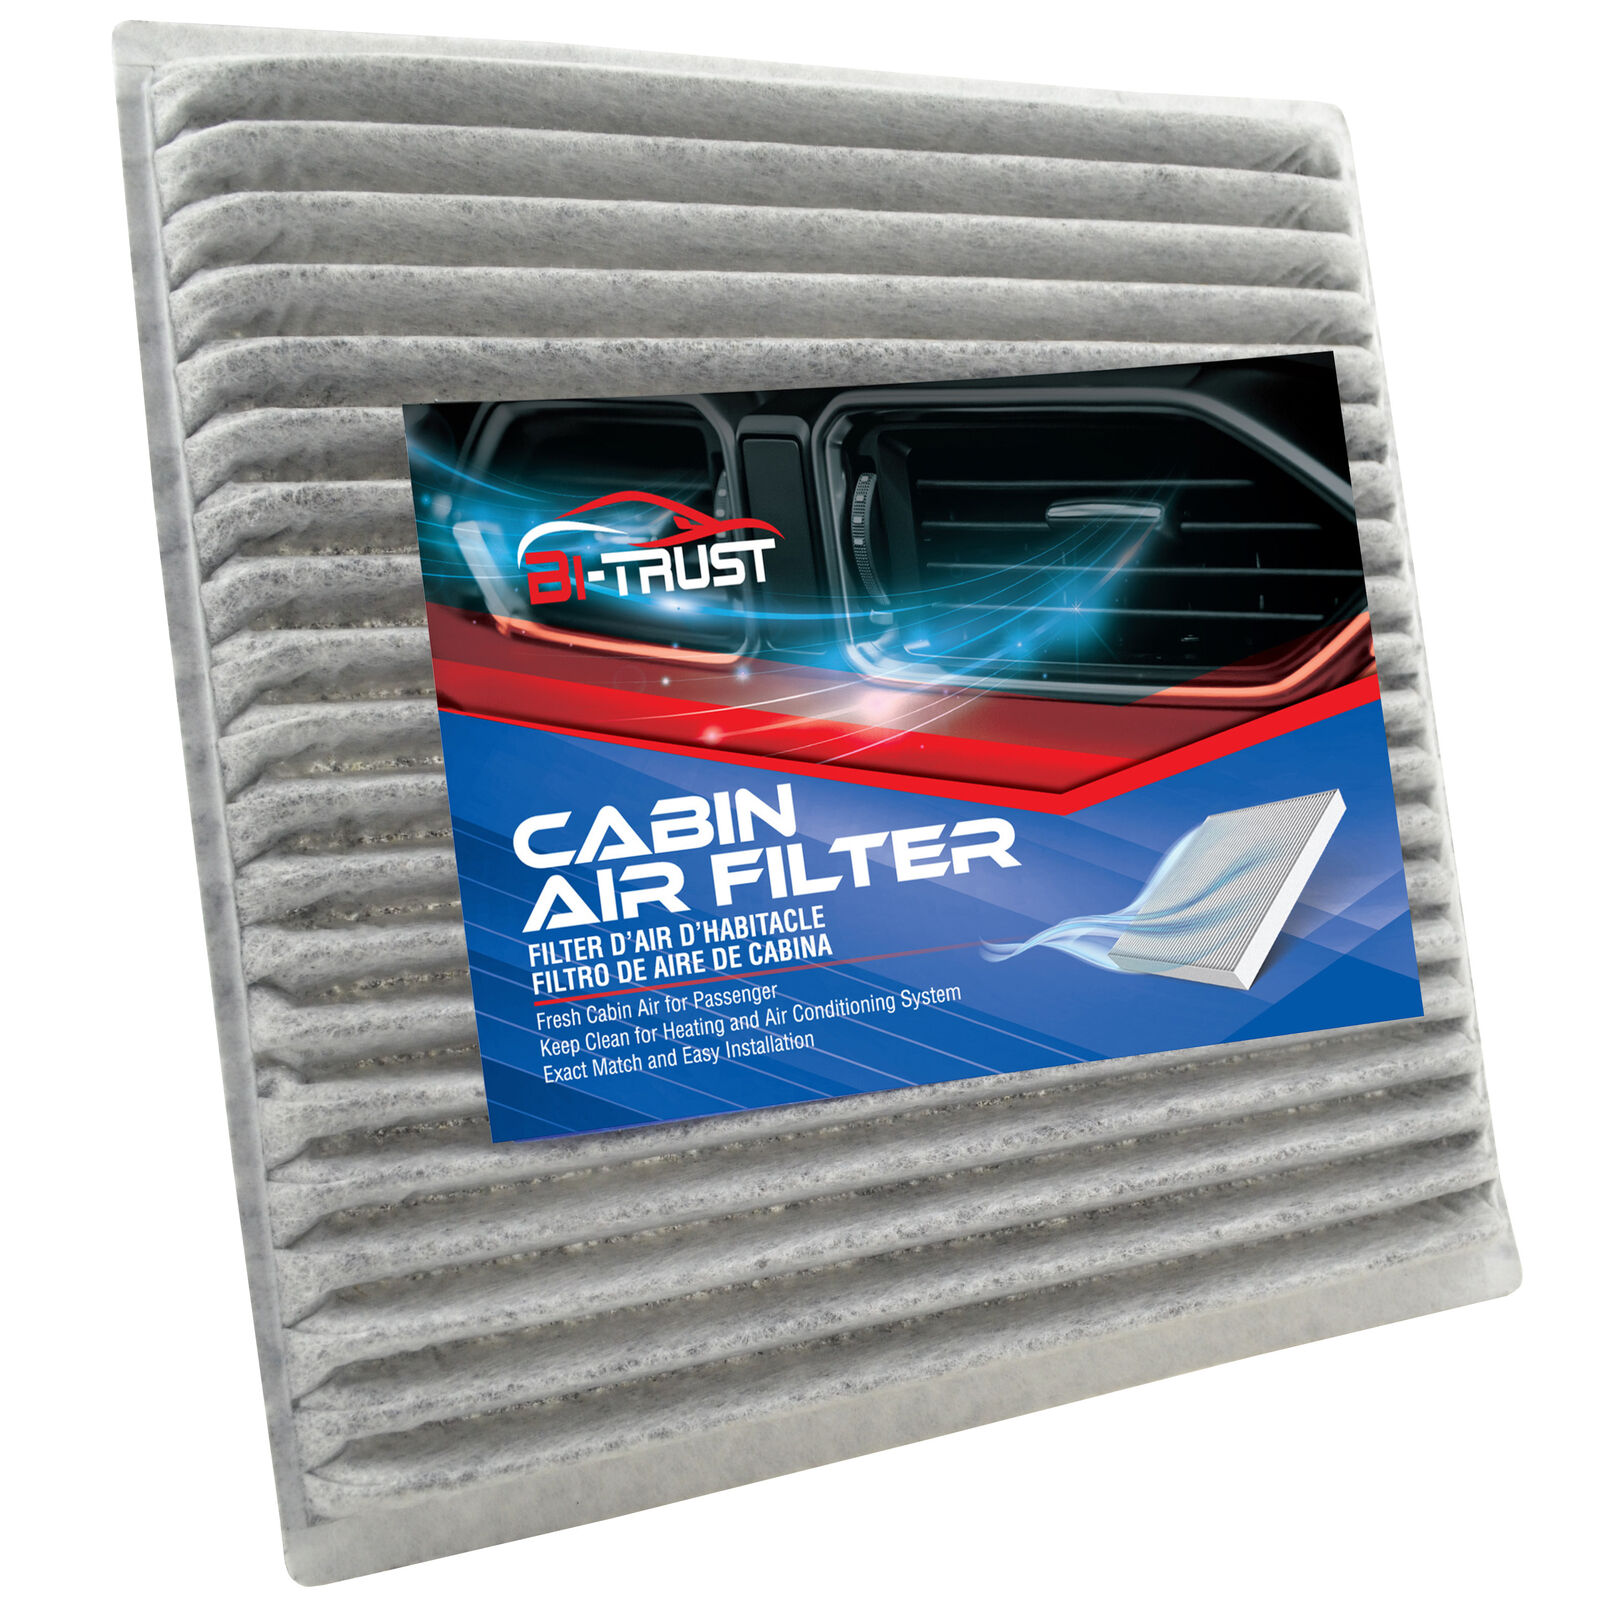 Cabin Air Filter CF9846A for Subaru Legacy Outback Tribeca Toyota 4Runner Celica